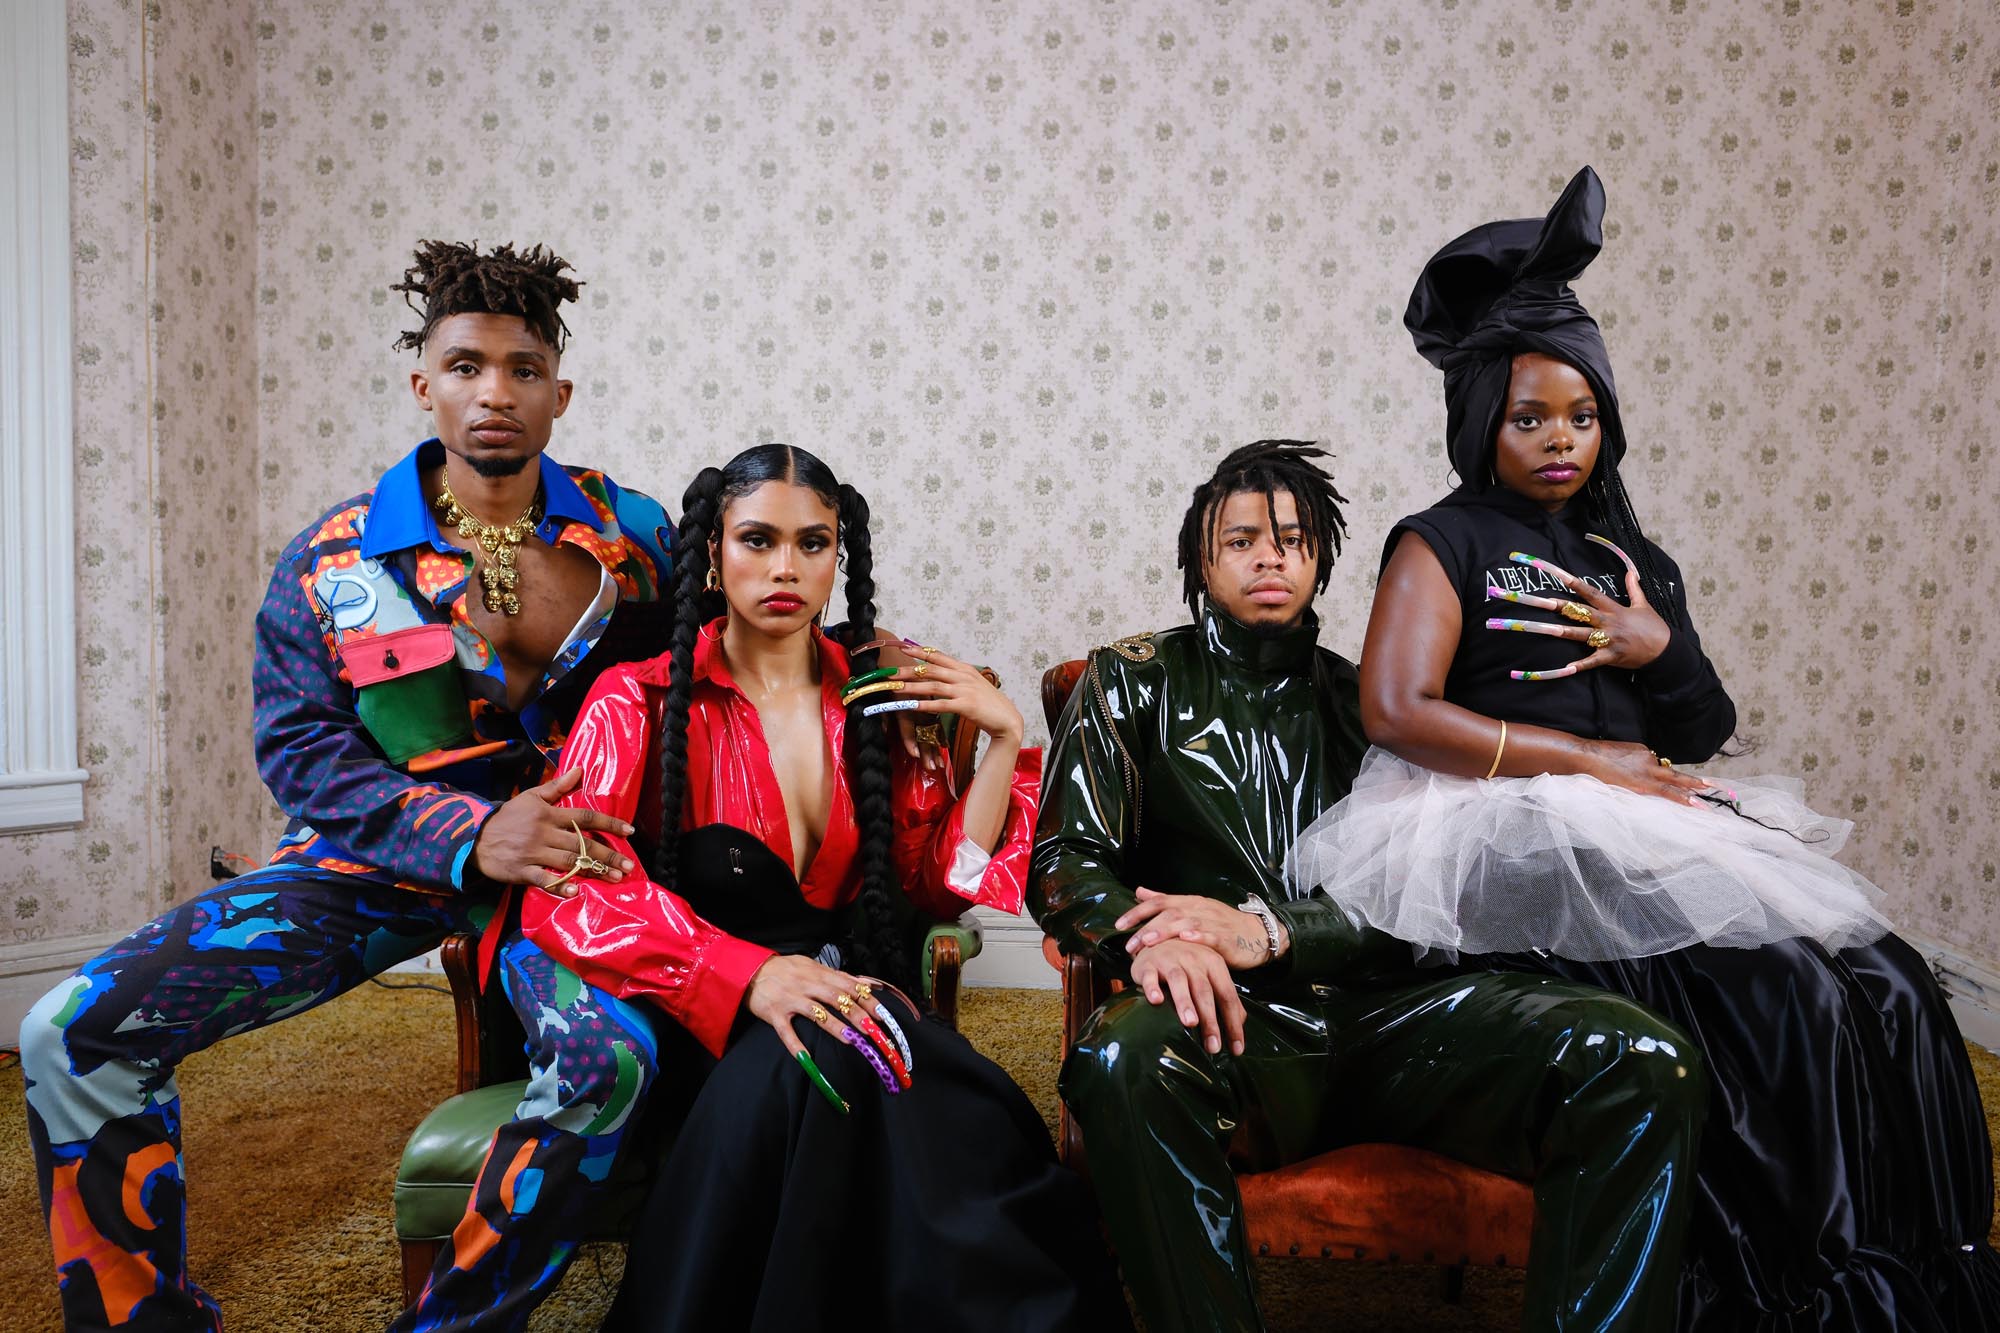 Four young African Americans pose in extravagant garments, framed against a drab wallpaper